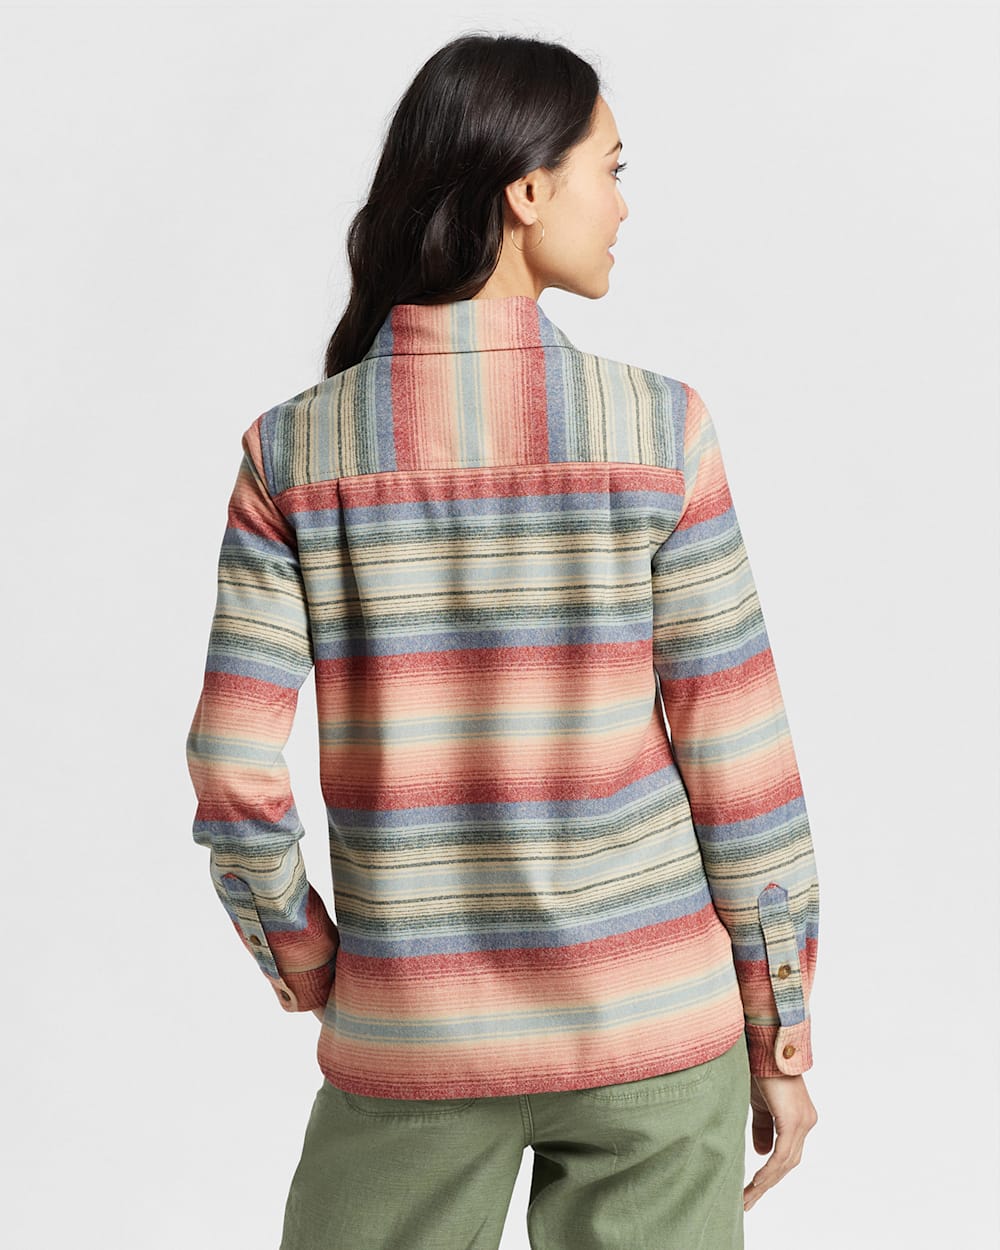 ALTERNATE VIEW OF WOMEN'S BOARD SHIRT IN CORAL MULTI STRIPE image number 3